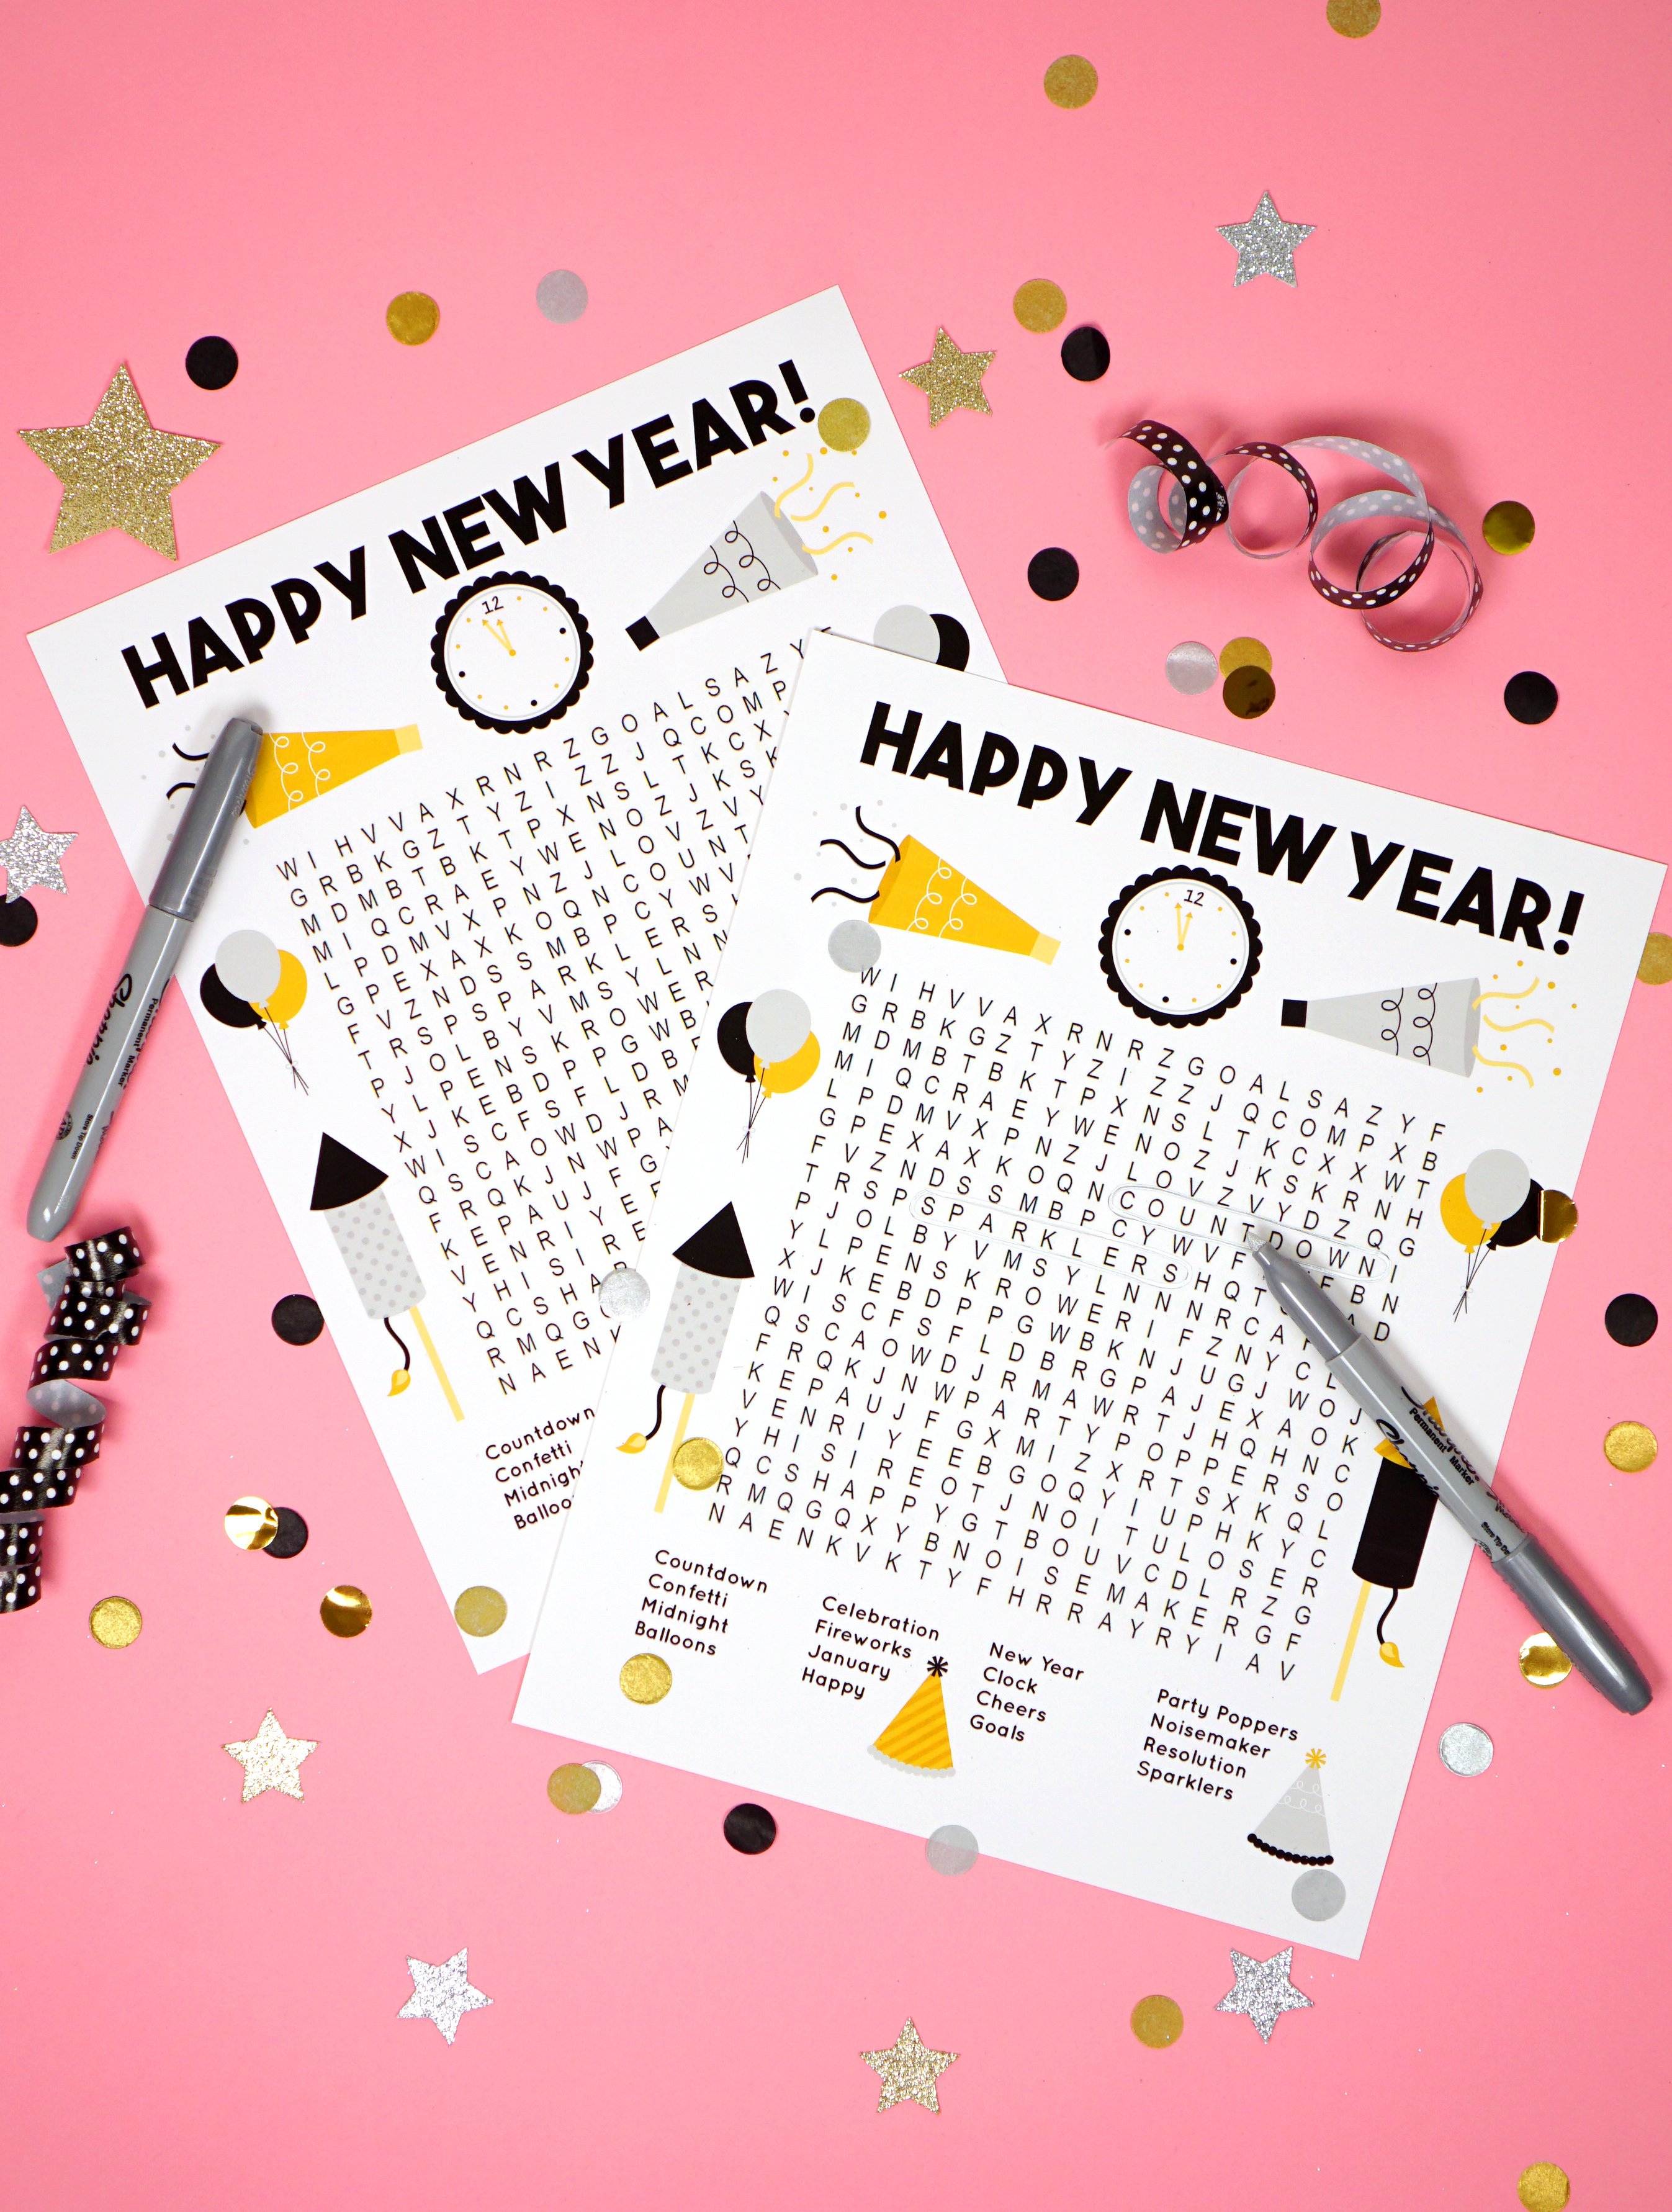 A New Years Word Search on a Pink Background With Large Confetti Peices